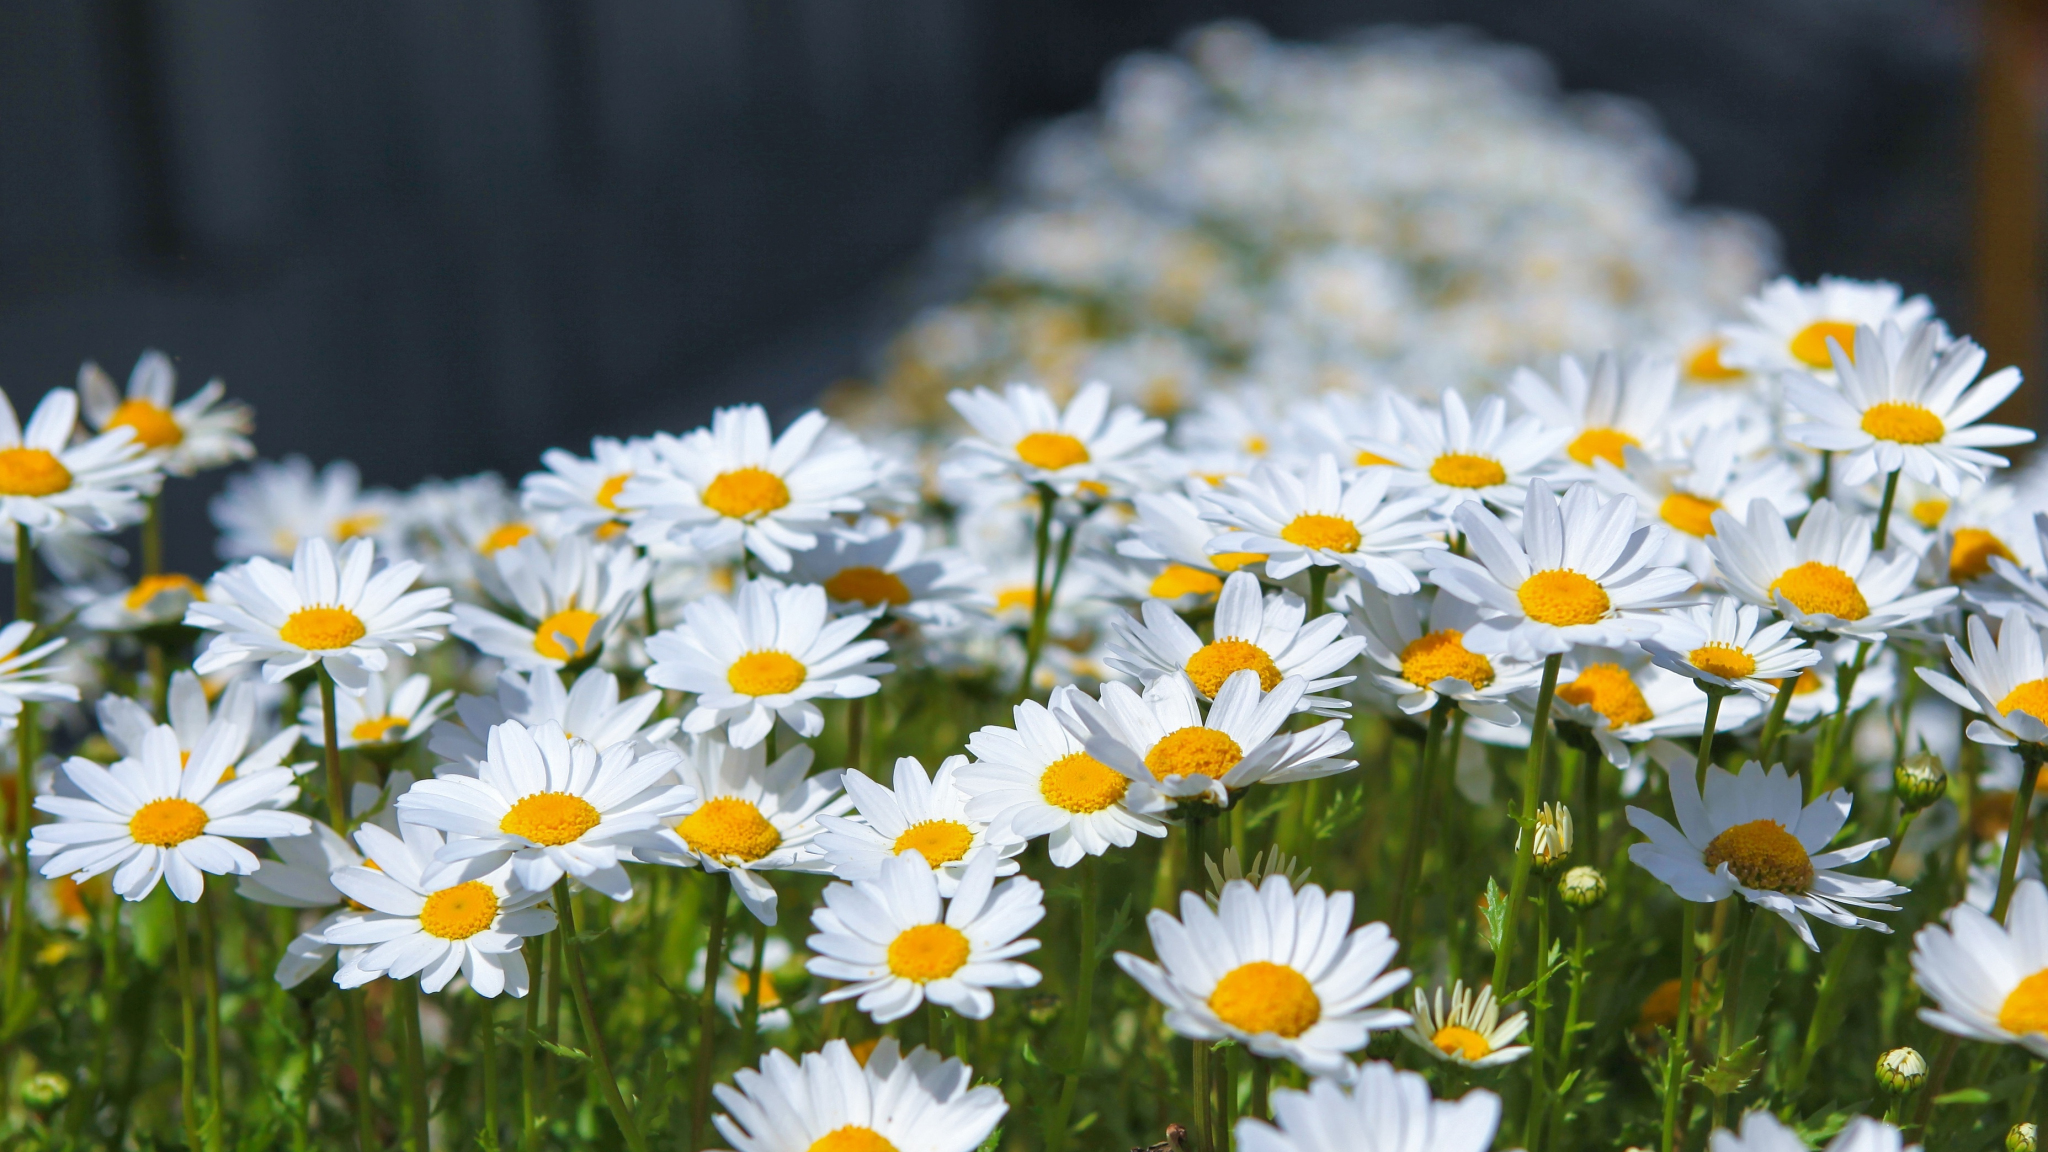 Meadow, spring, flowers, white daisy, 2048x1152 wallpaper